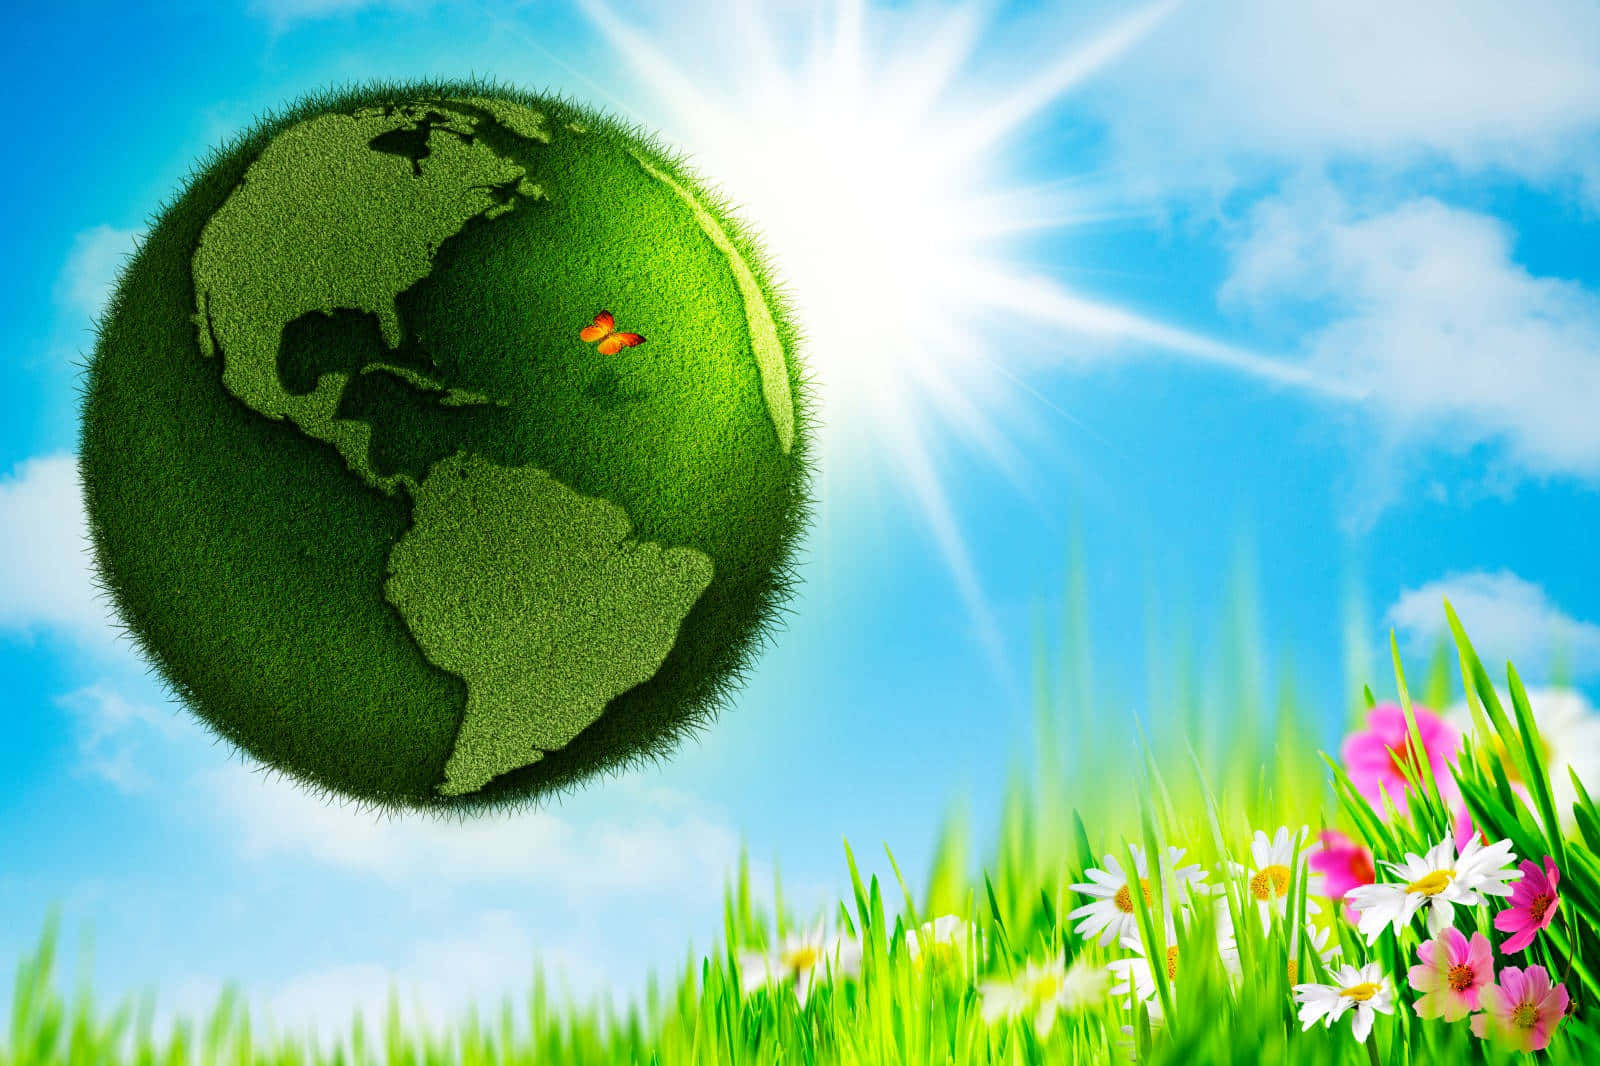 A Green Globe In The Grass With Flowers